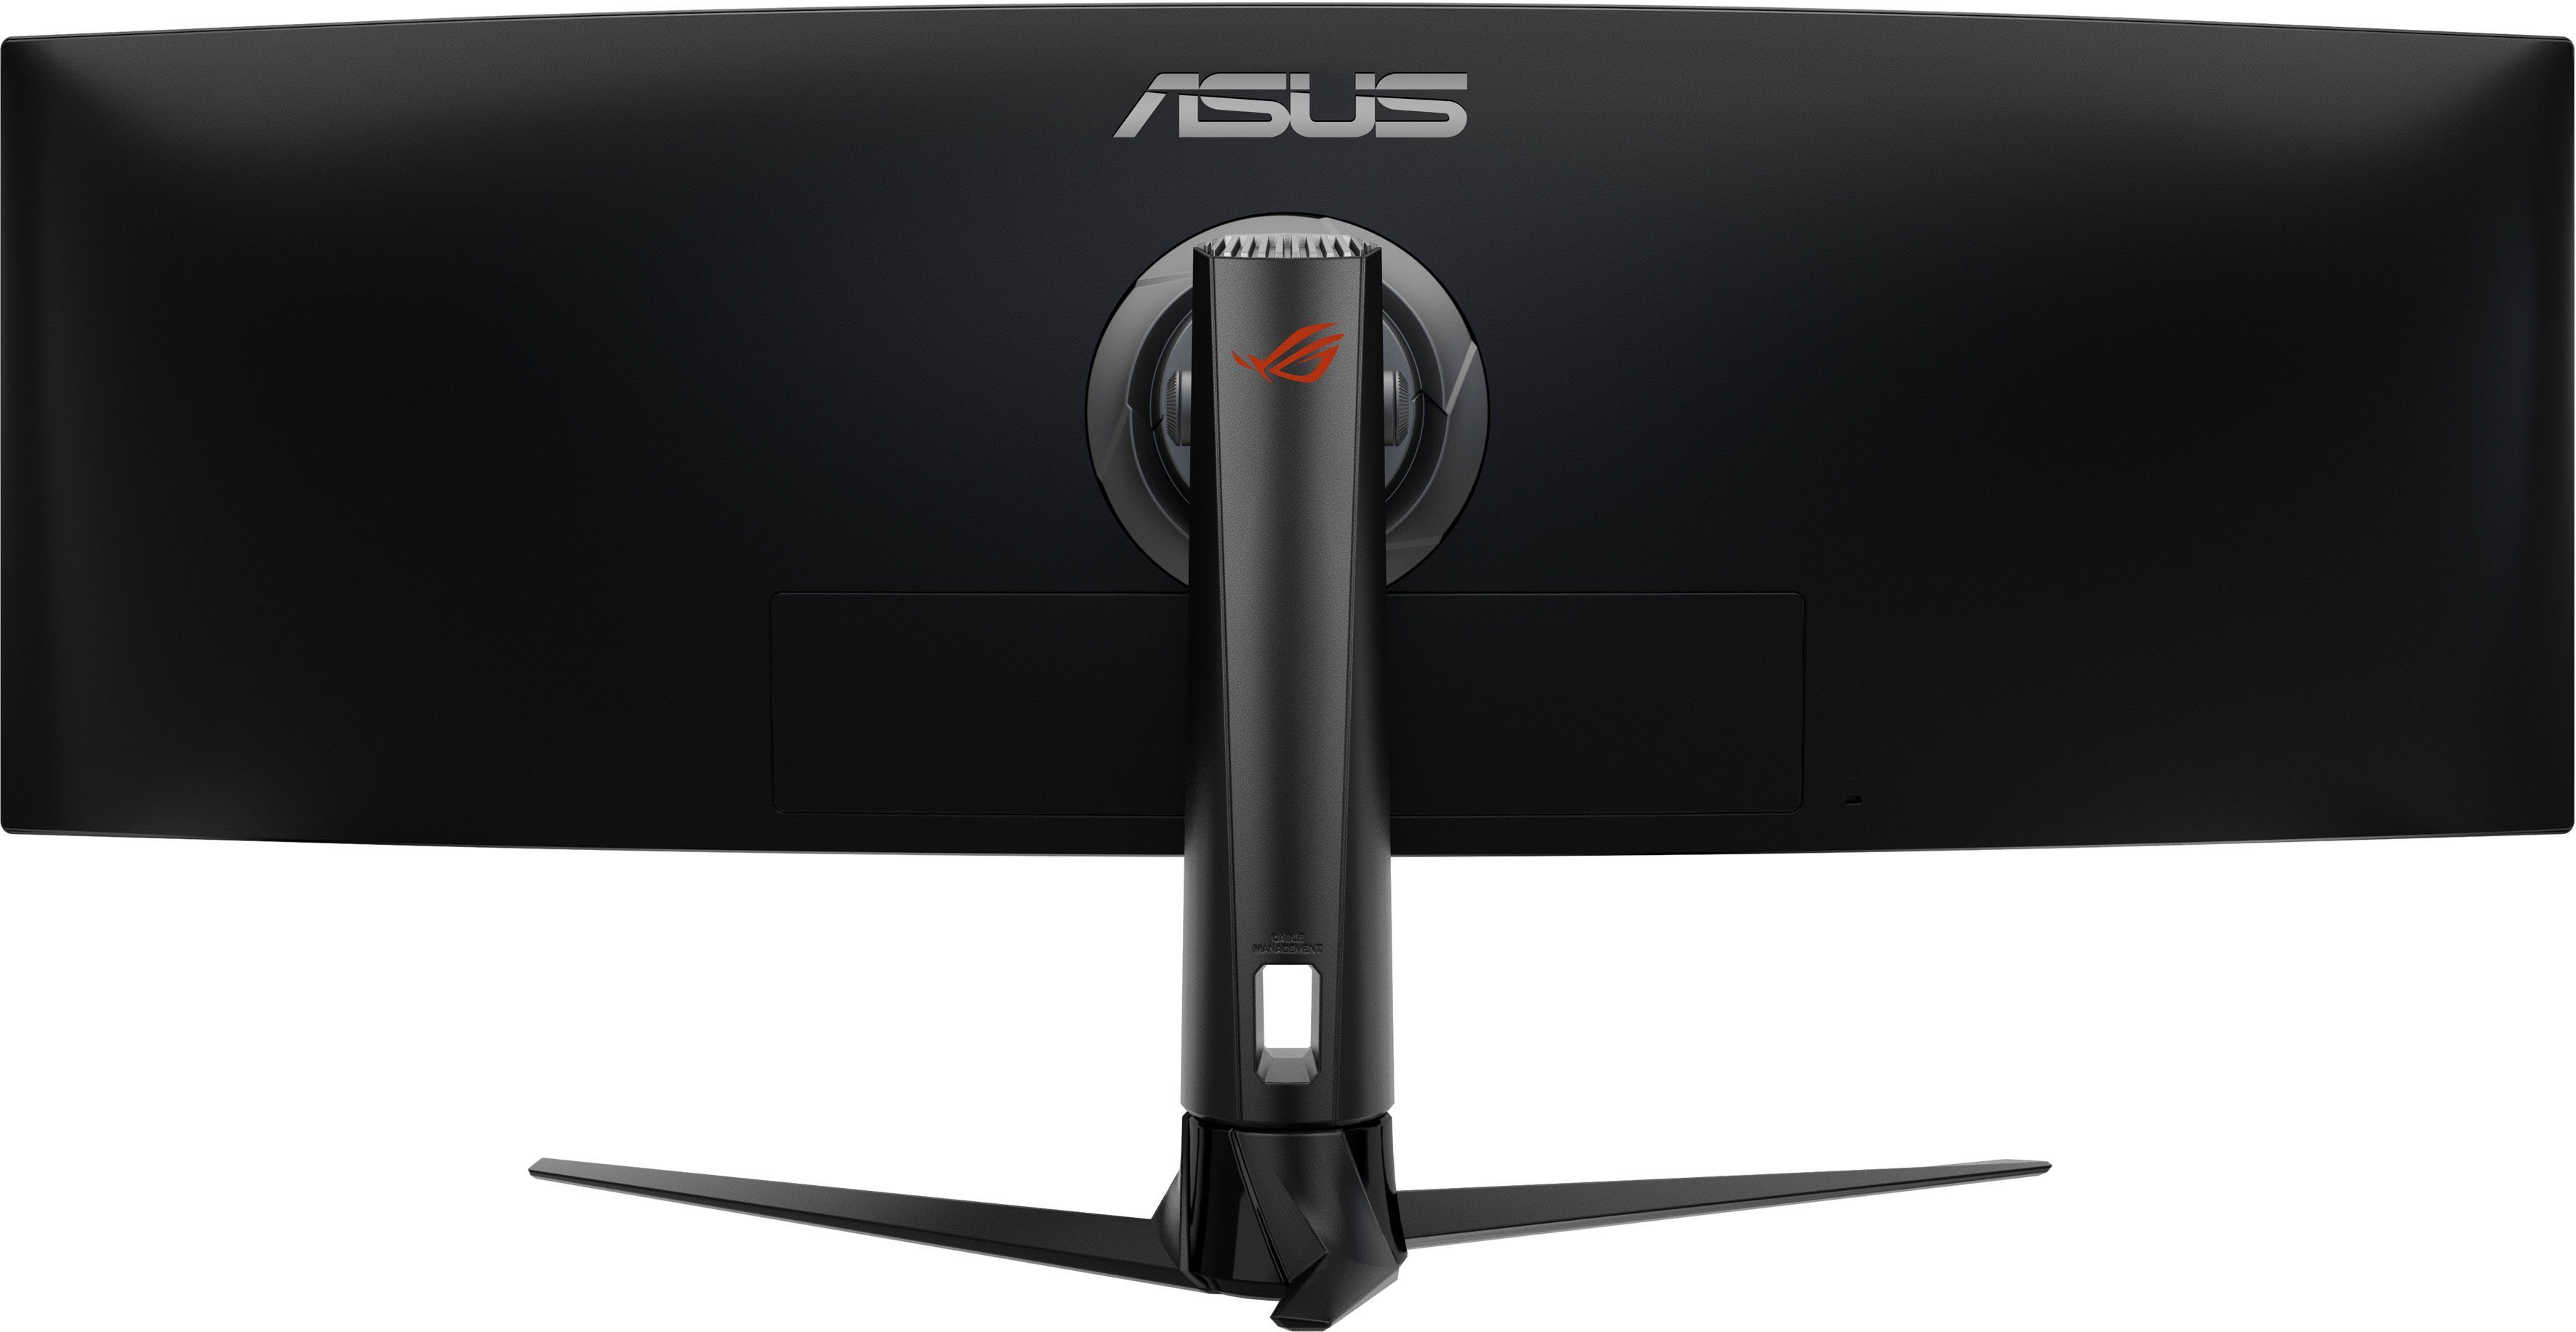 Asus XG49VQ Curved-Gaming-Monitor (124,46 4 3840 VA ms 1080 Hz, Gaming Monitor) px, x ", 144 Full HD, Reaktionszeit, cm/49 LED